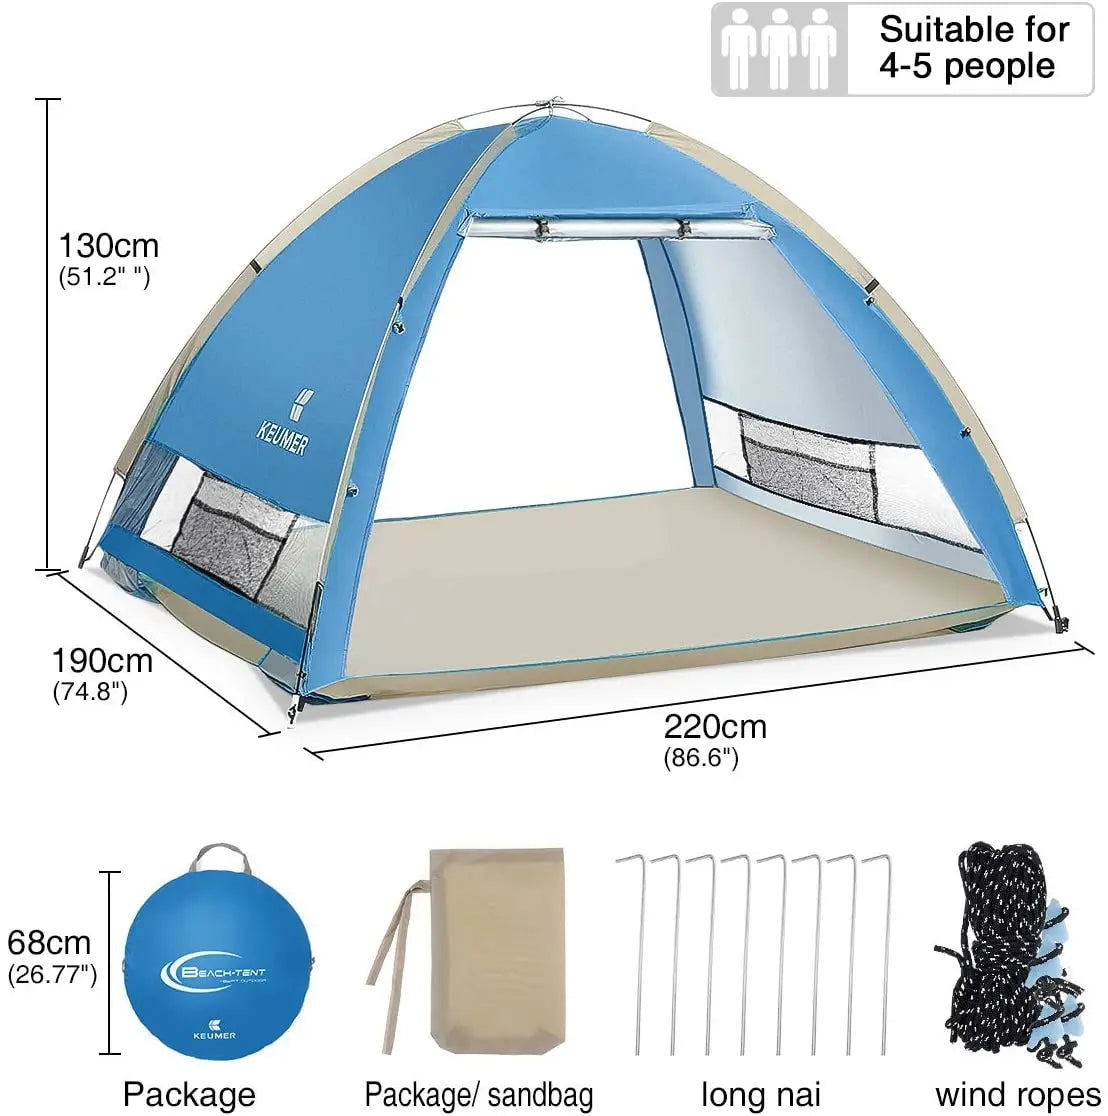 Quick Automatic Opening Tent 2-3 People Ultralight Camping Tent Waterproof